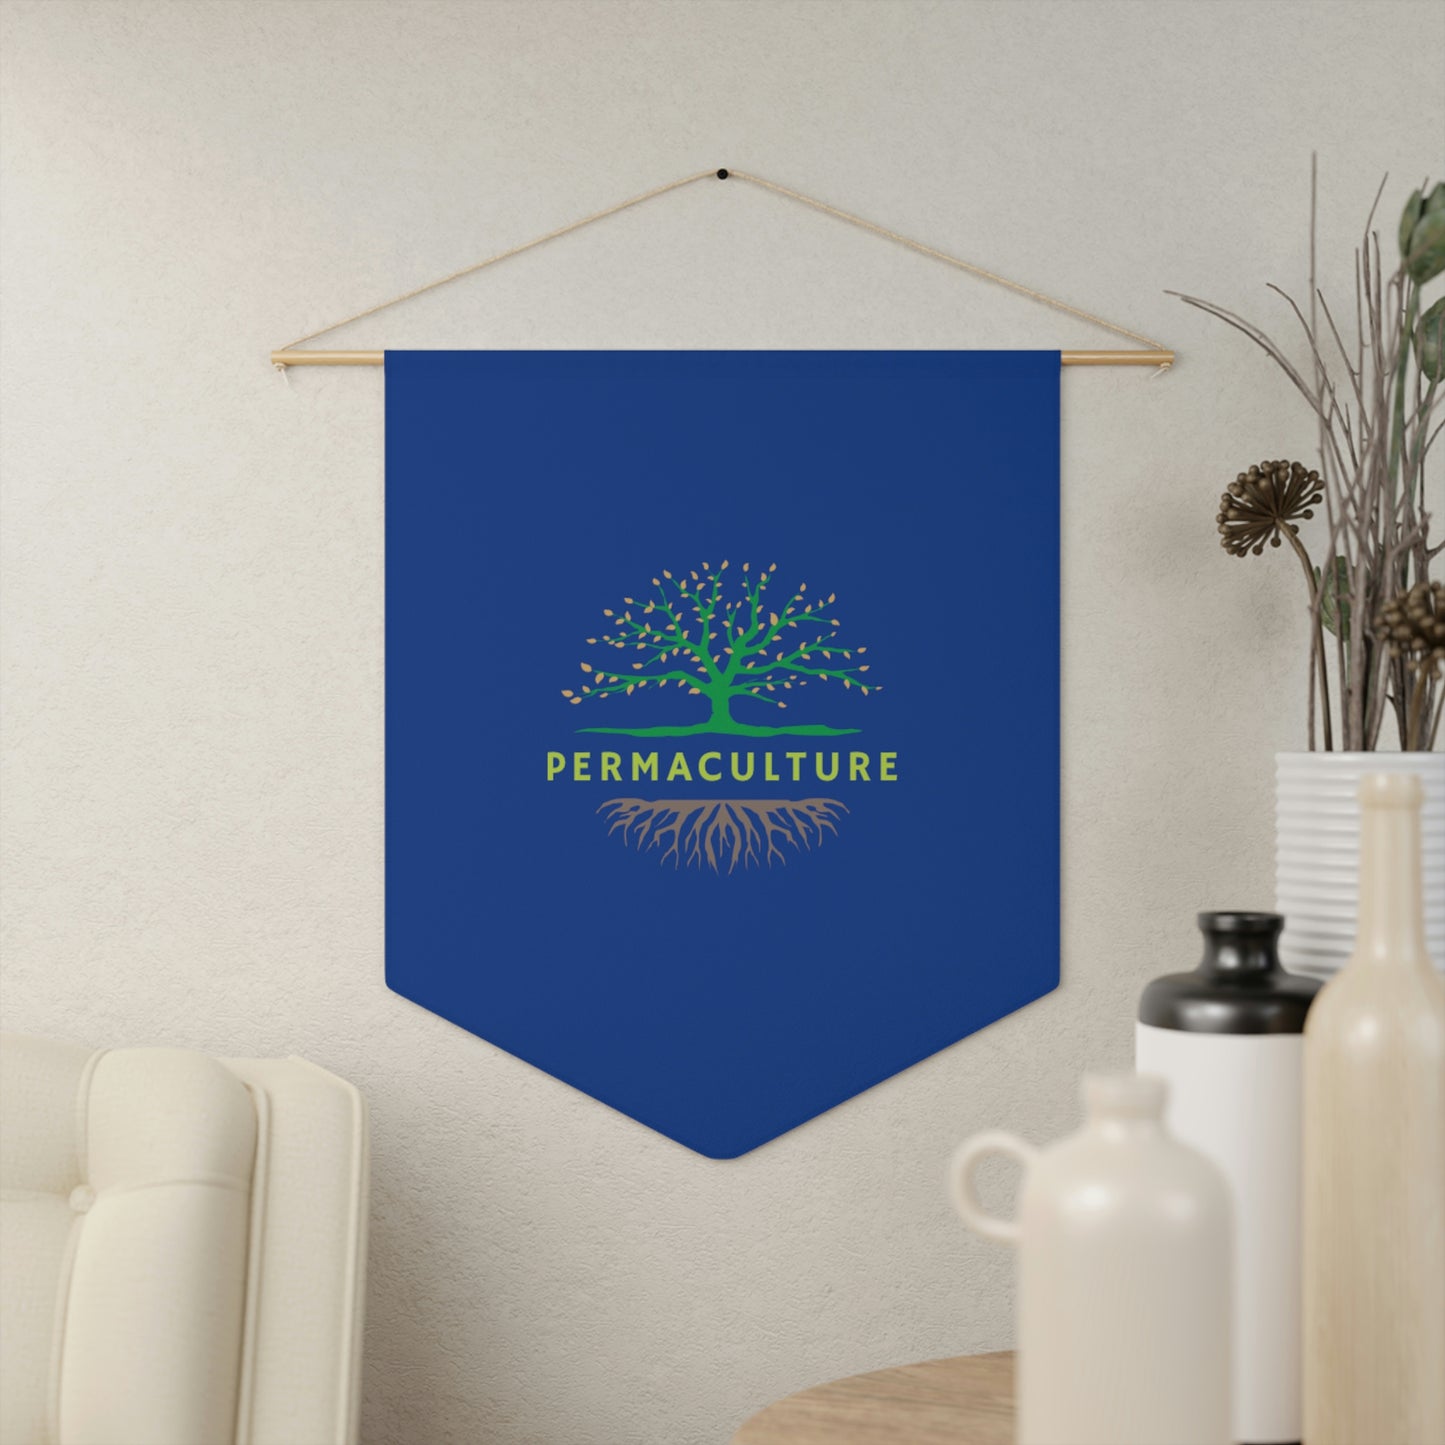 Permaculture Pennant - Blue